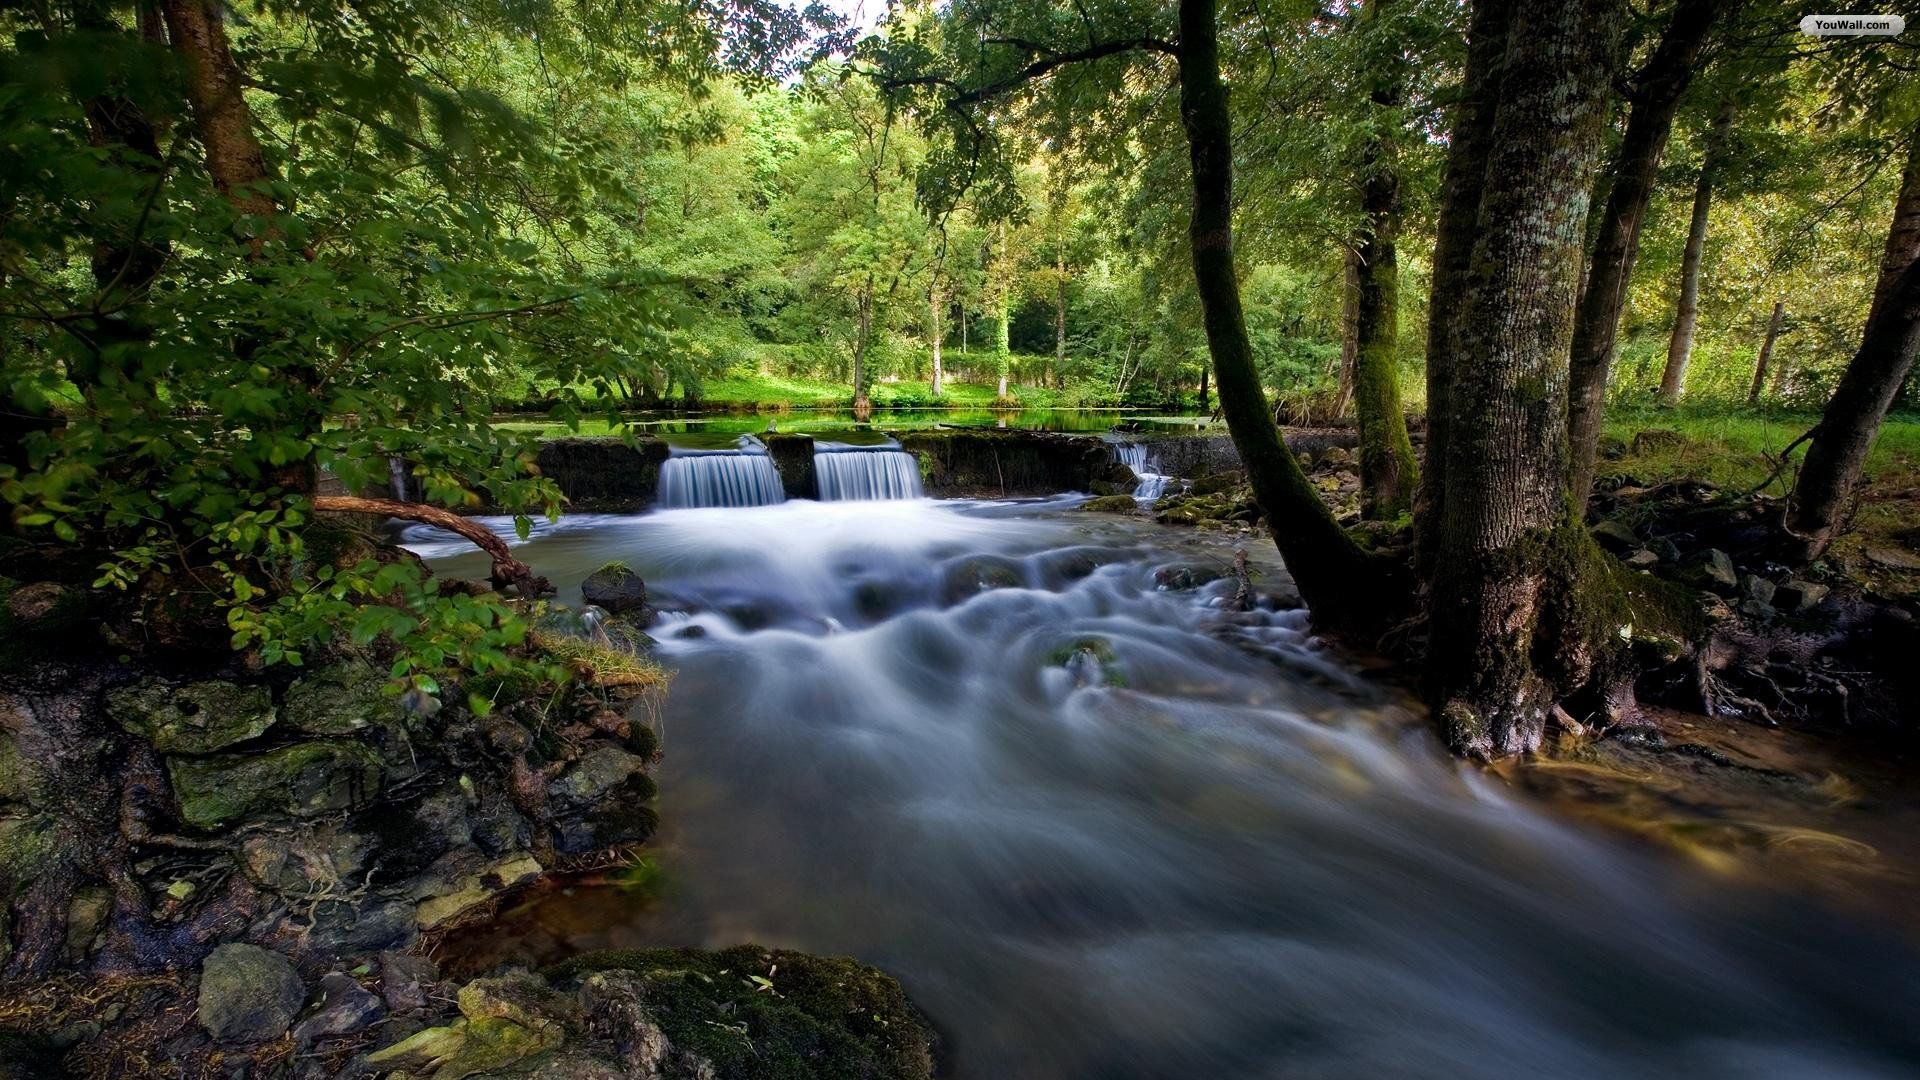 Amazing River Photography Hd Landscape Wallpapers